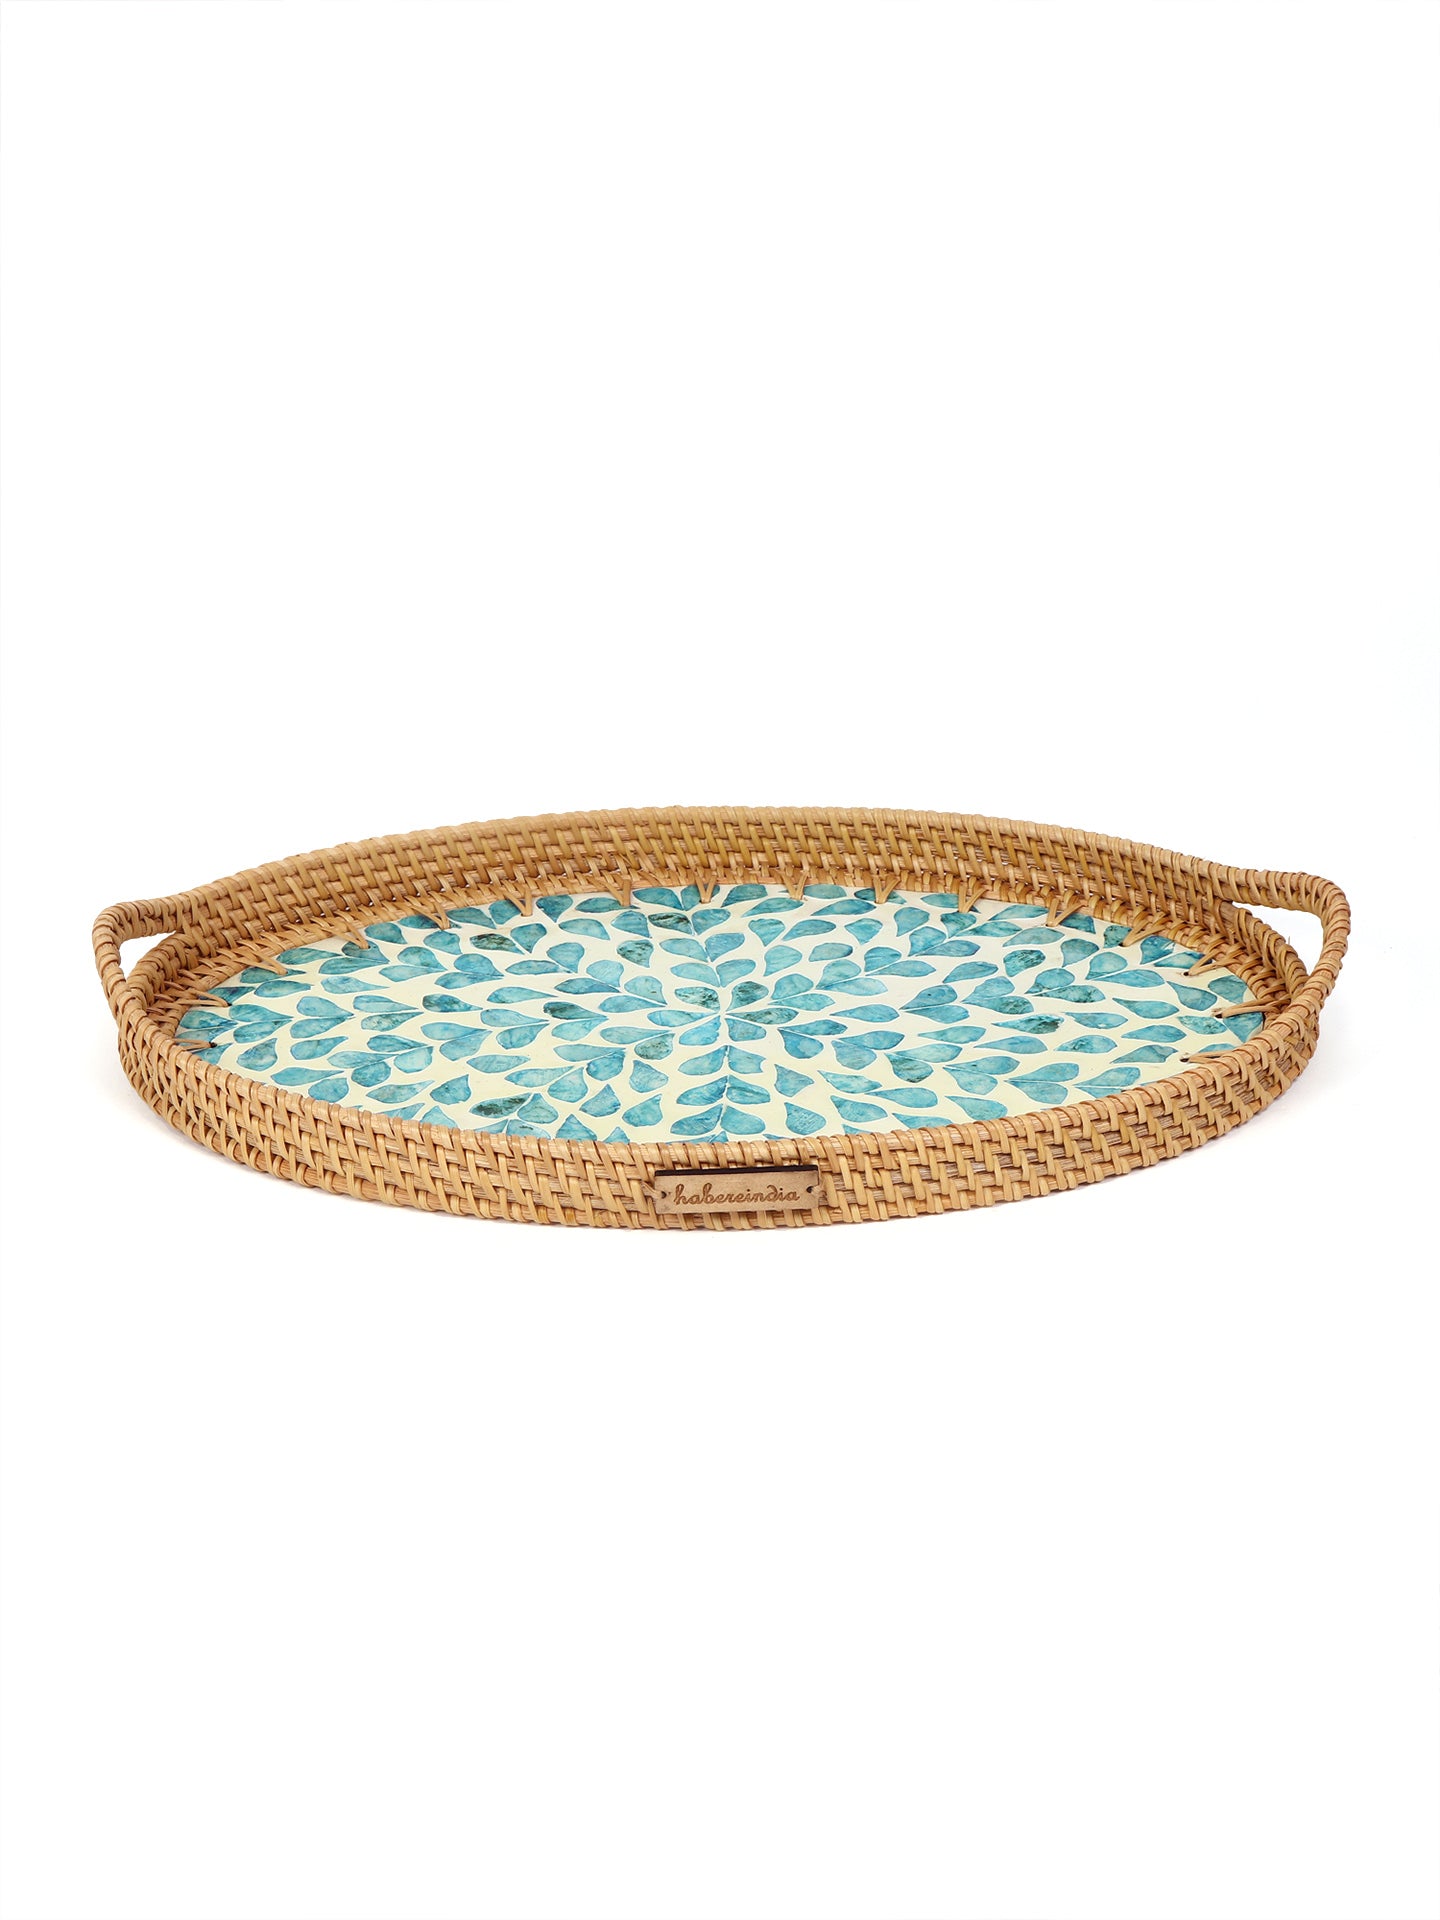 Buy Online Cane Tray Oval 